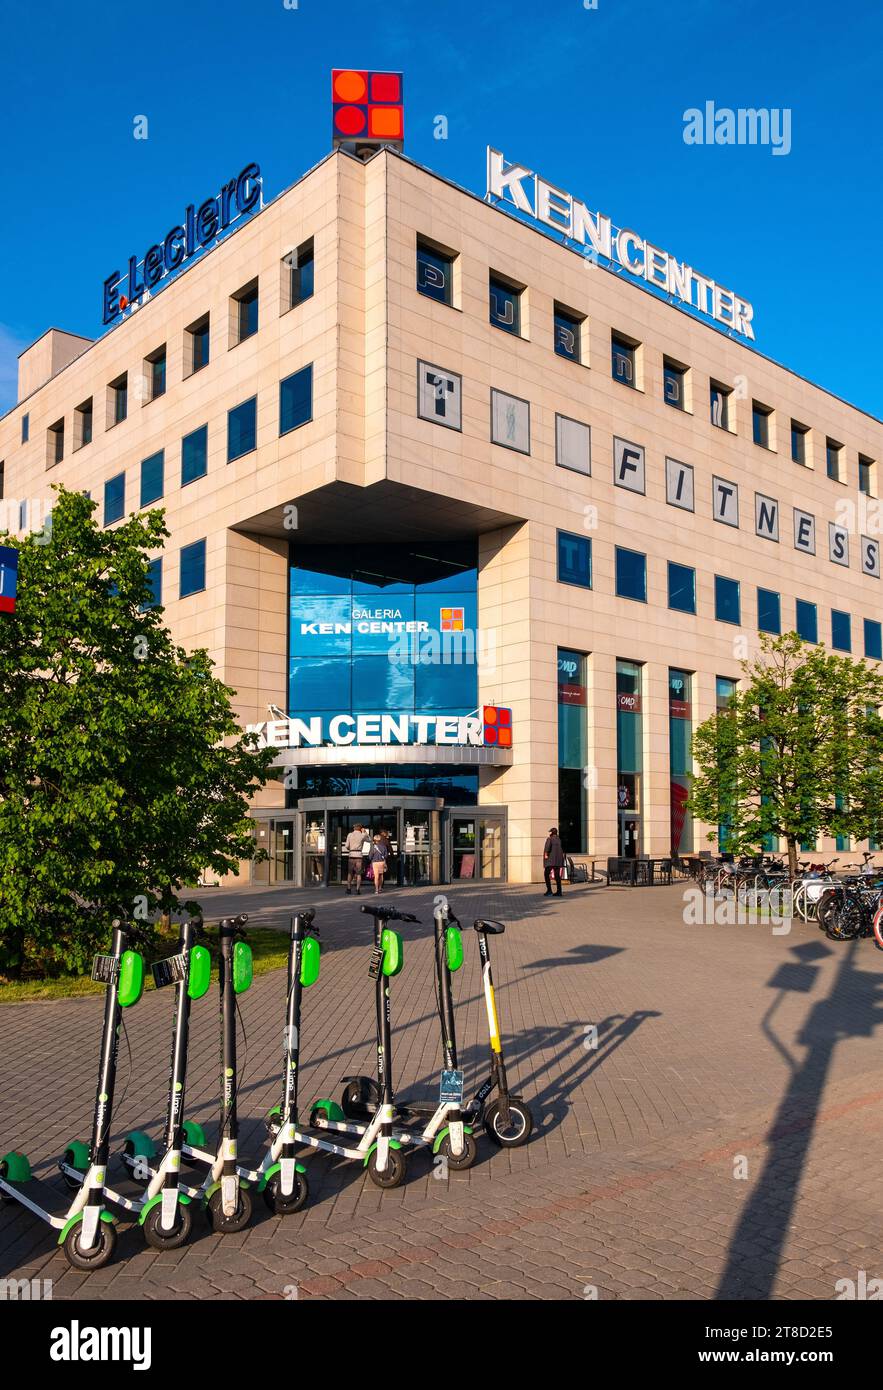 Warsaw, Poland - May 28, 2021: Electric scooters in front of KEN Center complex at KEN and Ciszewskiego street in Stoklosy quarter of Ursynow Stock Photo